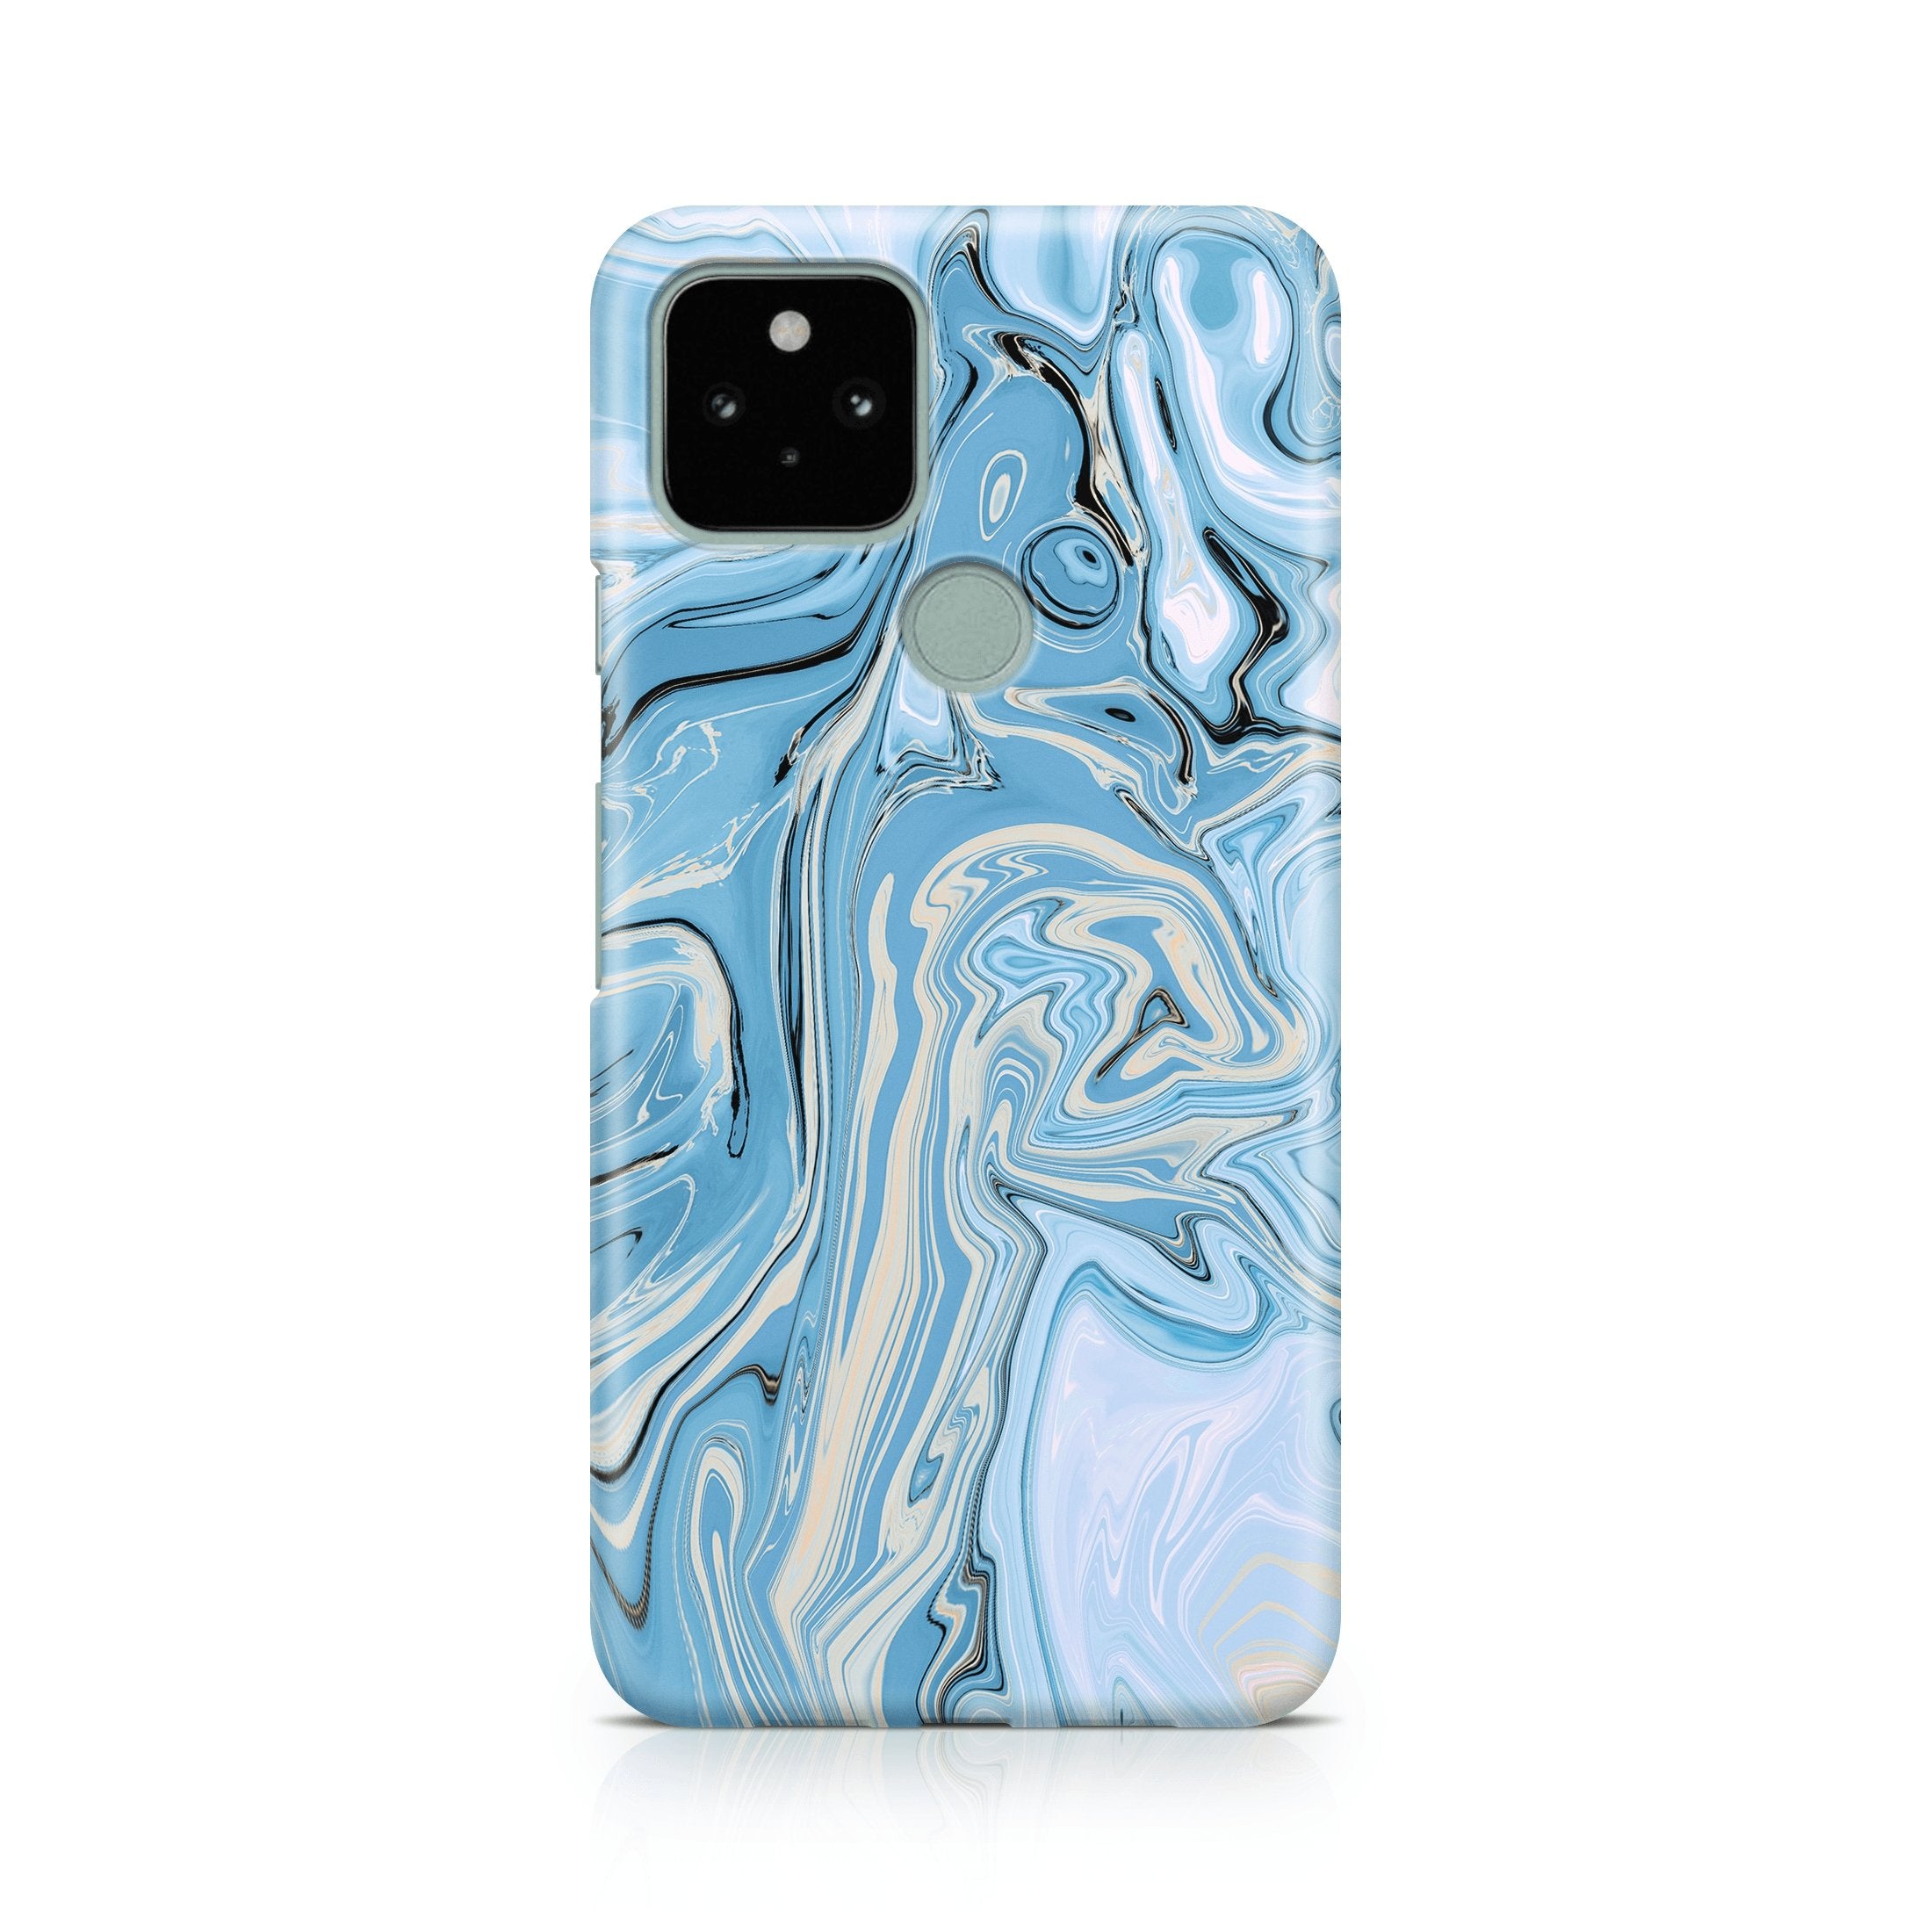 Blue & Creme Agate - Google phone case designs by CaseSwagger